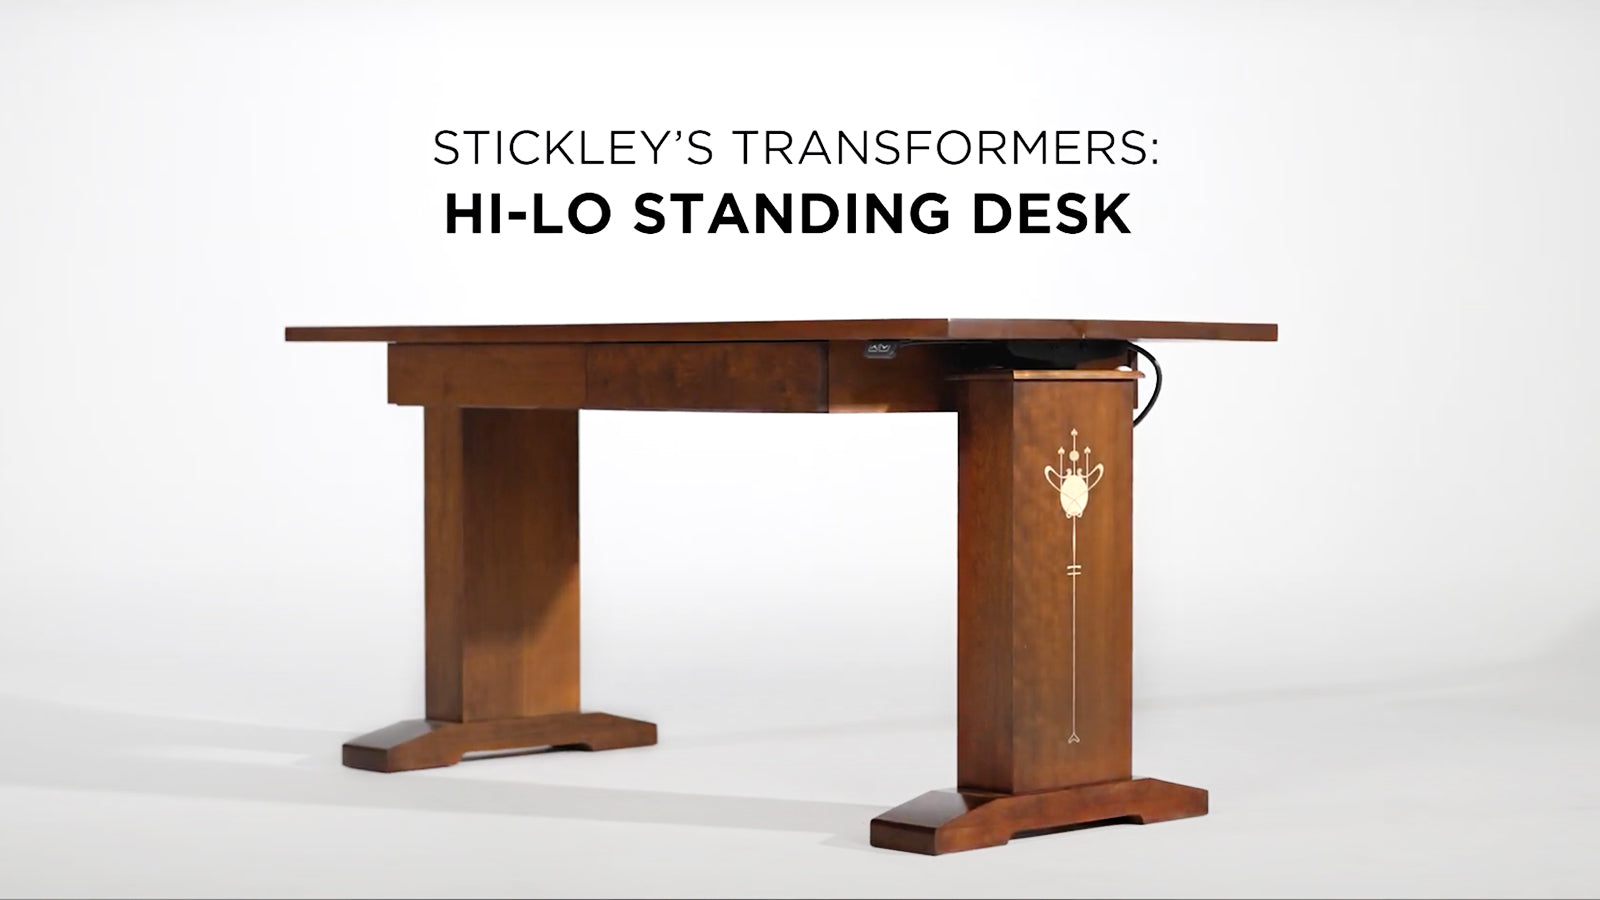 Load video: Thanks to some amazing engineering, certain Stickley pieces—like the Hi-Lo Standing Desk—have a knack for changing in ways you don’t expect. We call them our “transformers,” and they’re great examples of how we value function and versatility. See it in person at your nearest Stickley dealer!